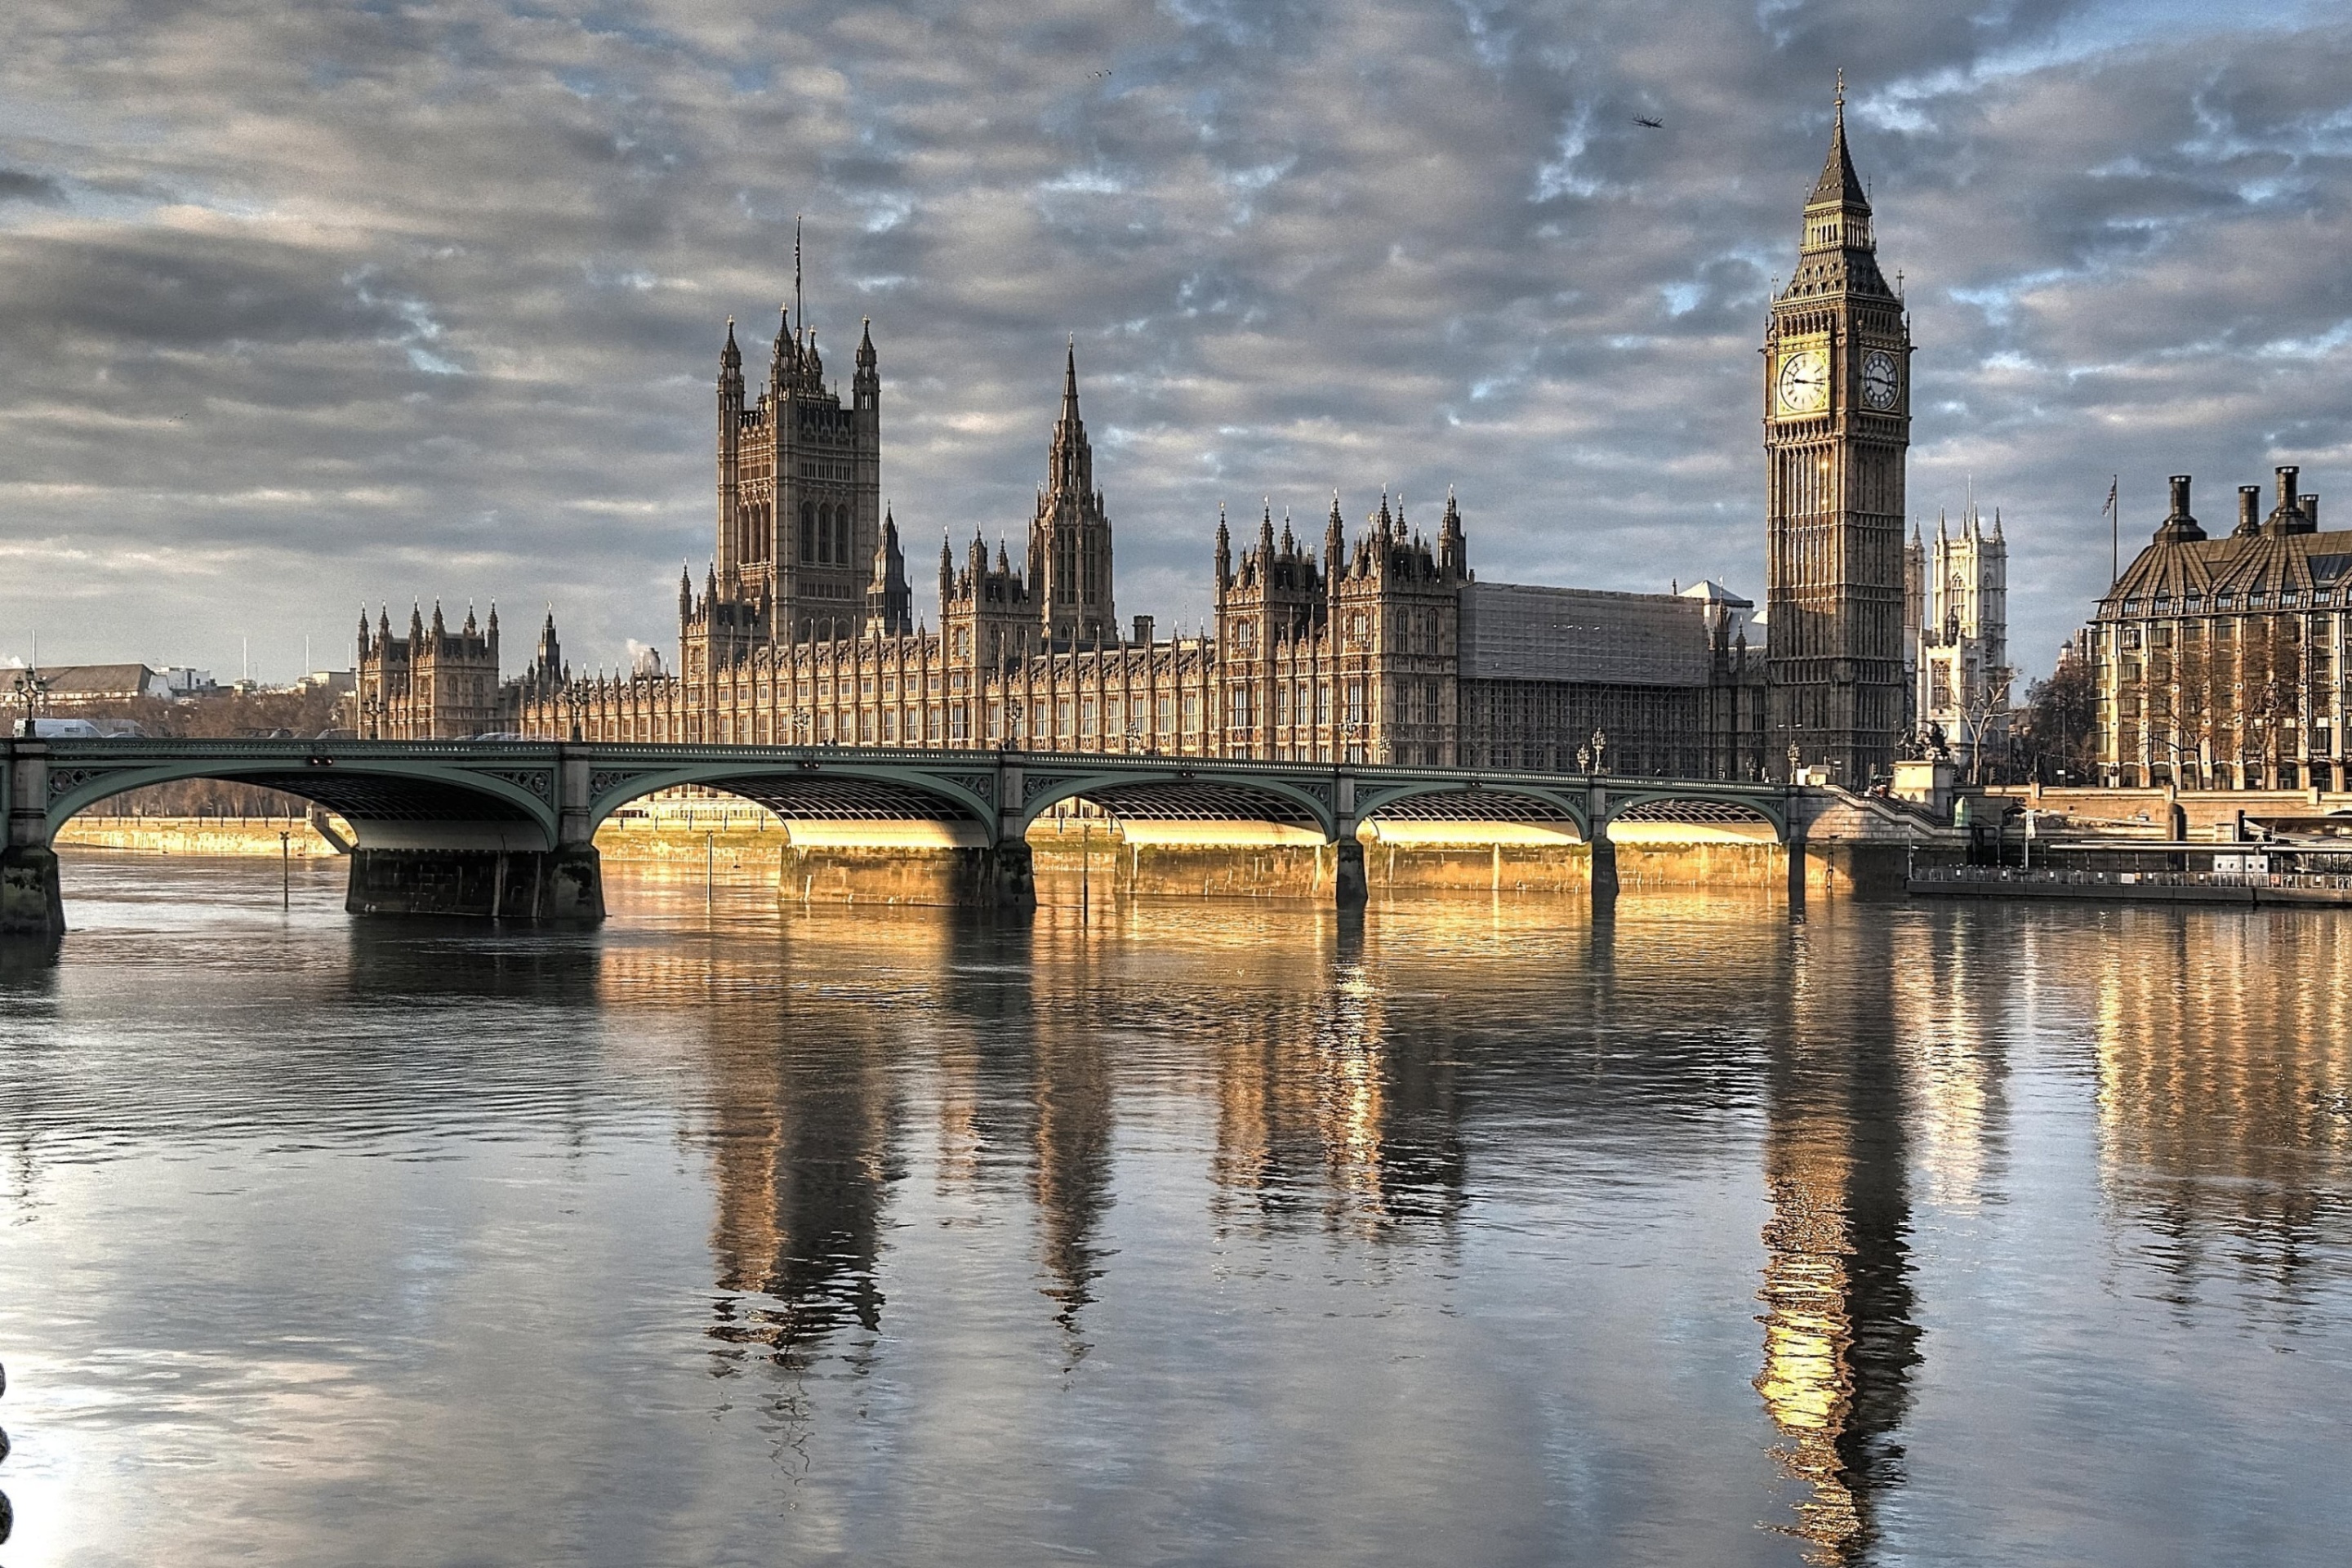 Palace of Westminster in London screenshot #1 2880x1920